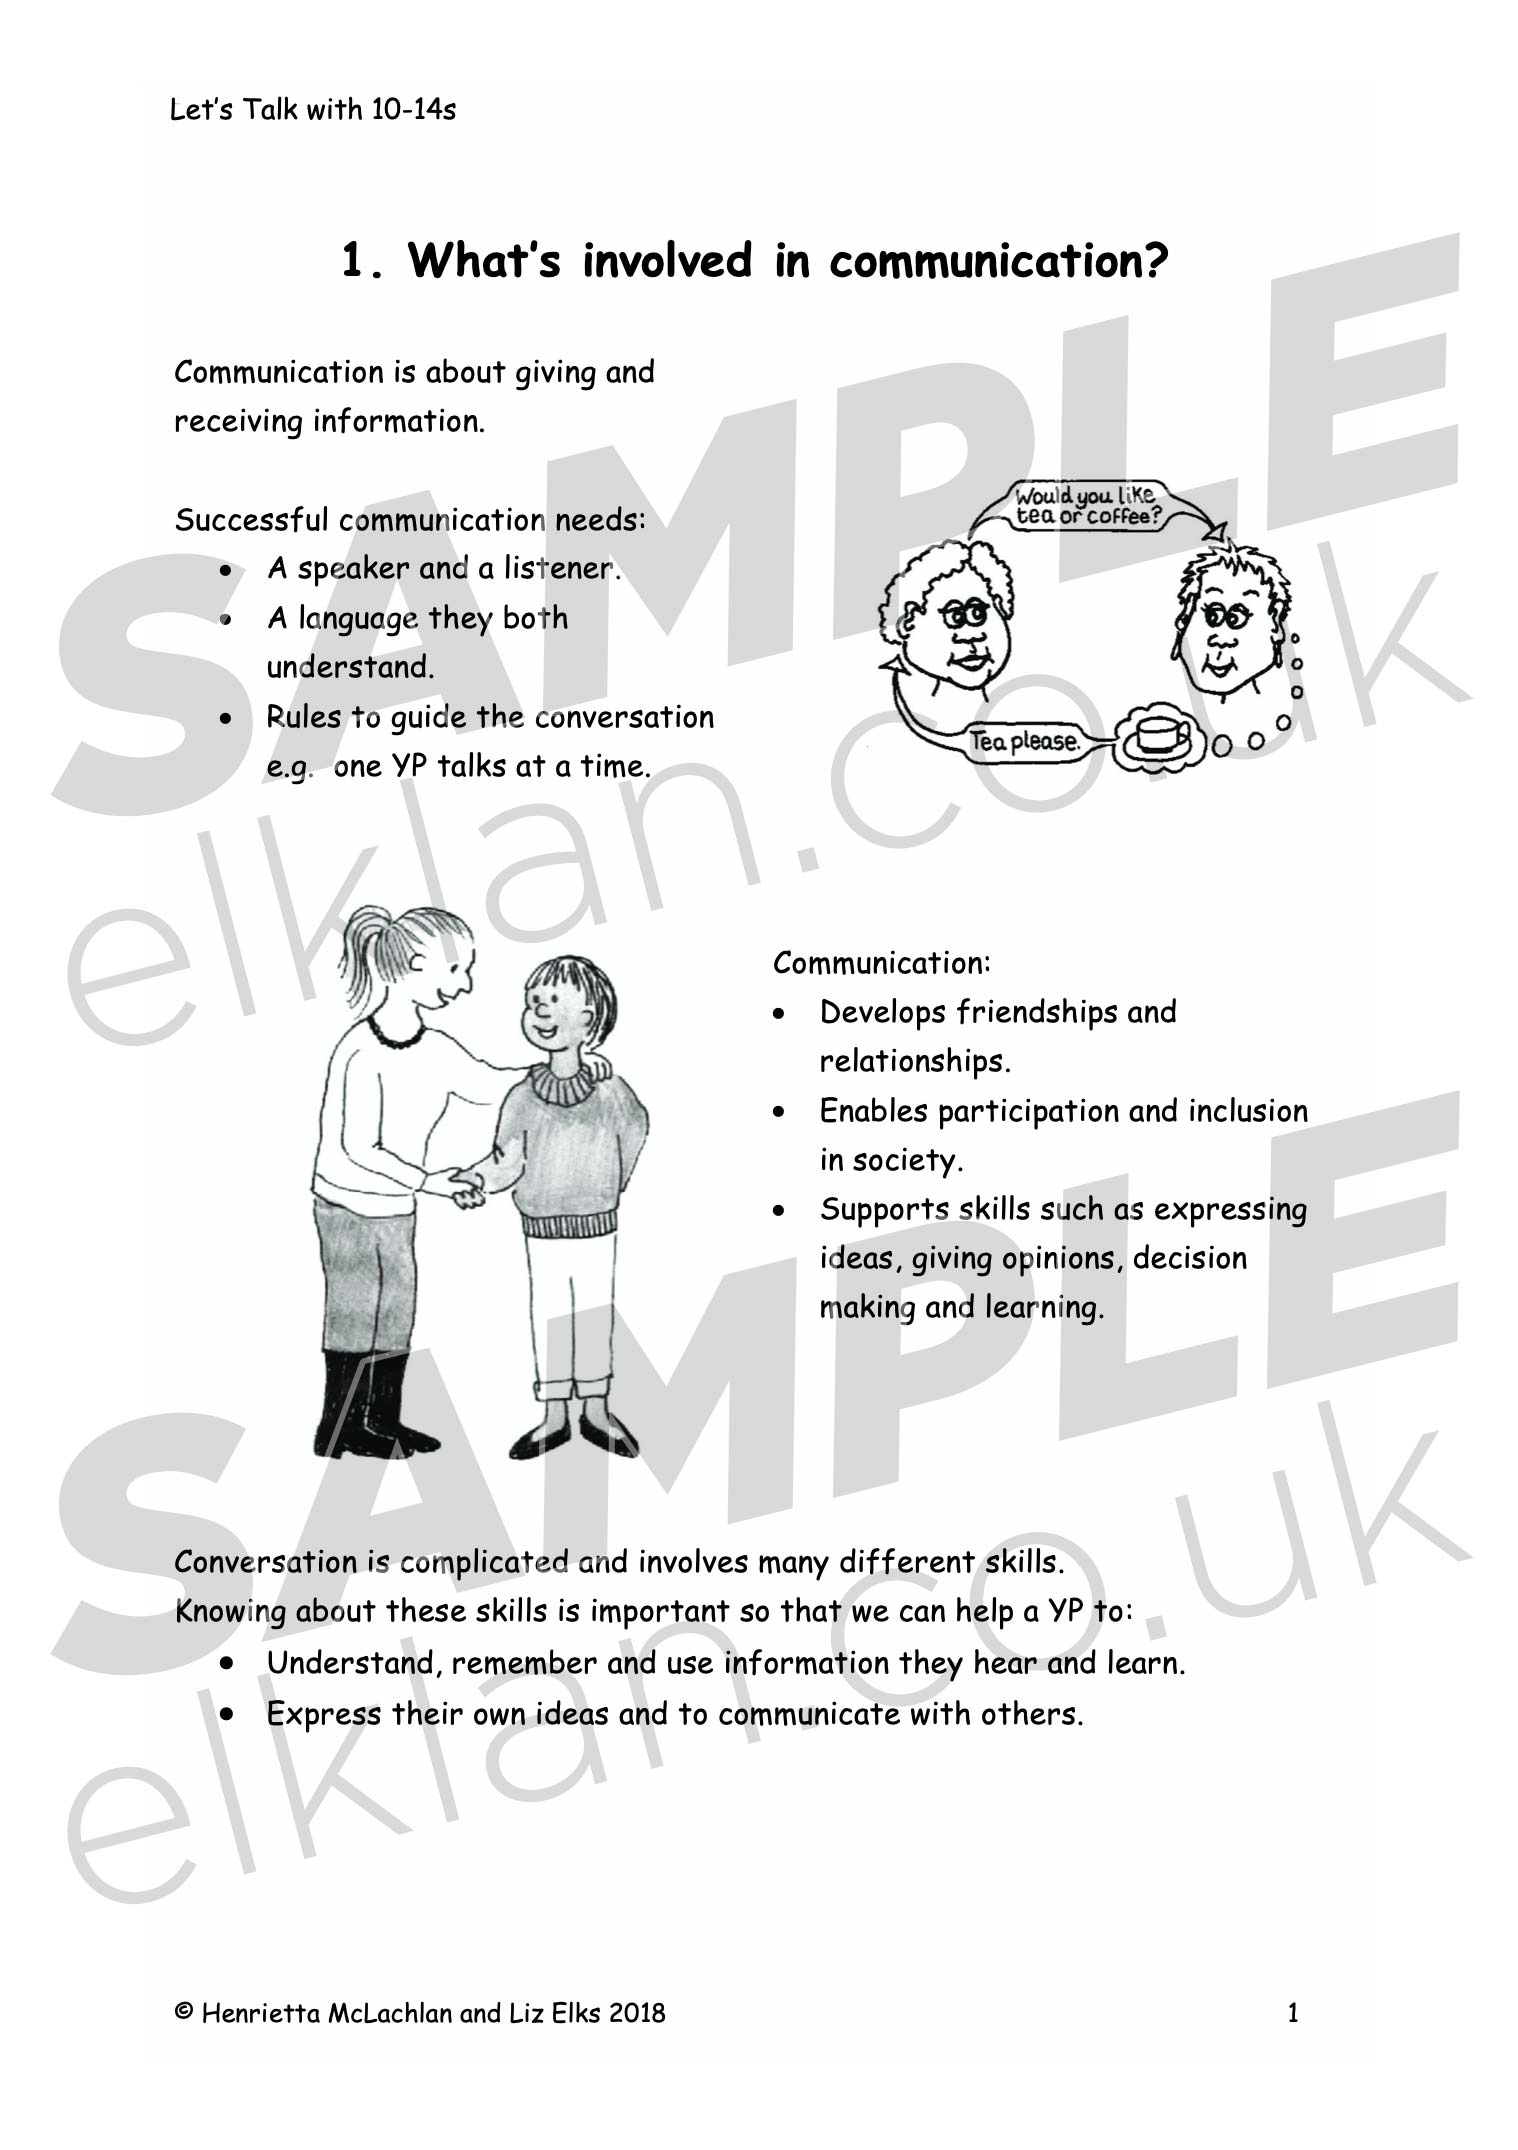 Let's Talk with 10-14s workbook sample image